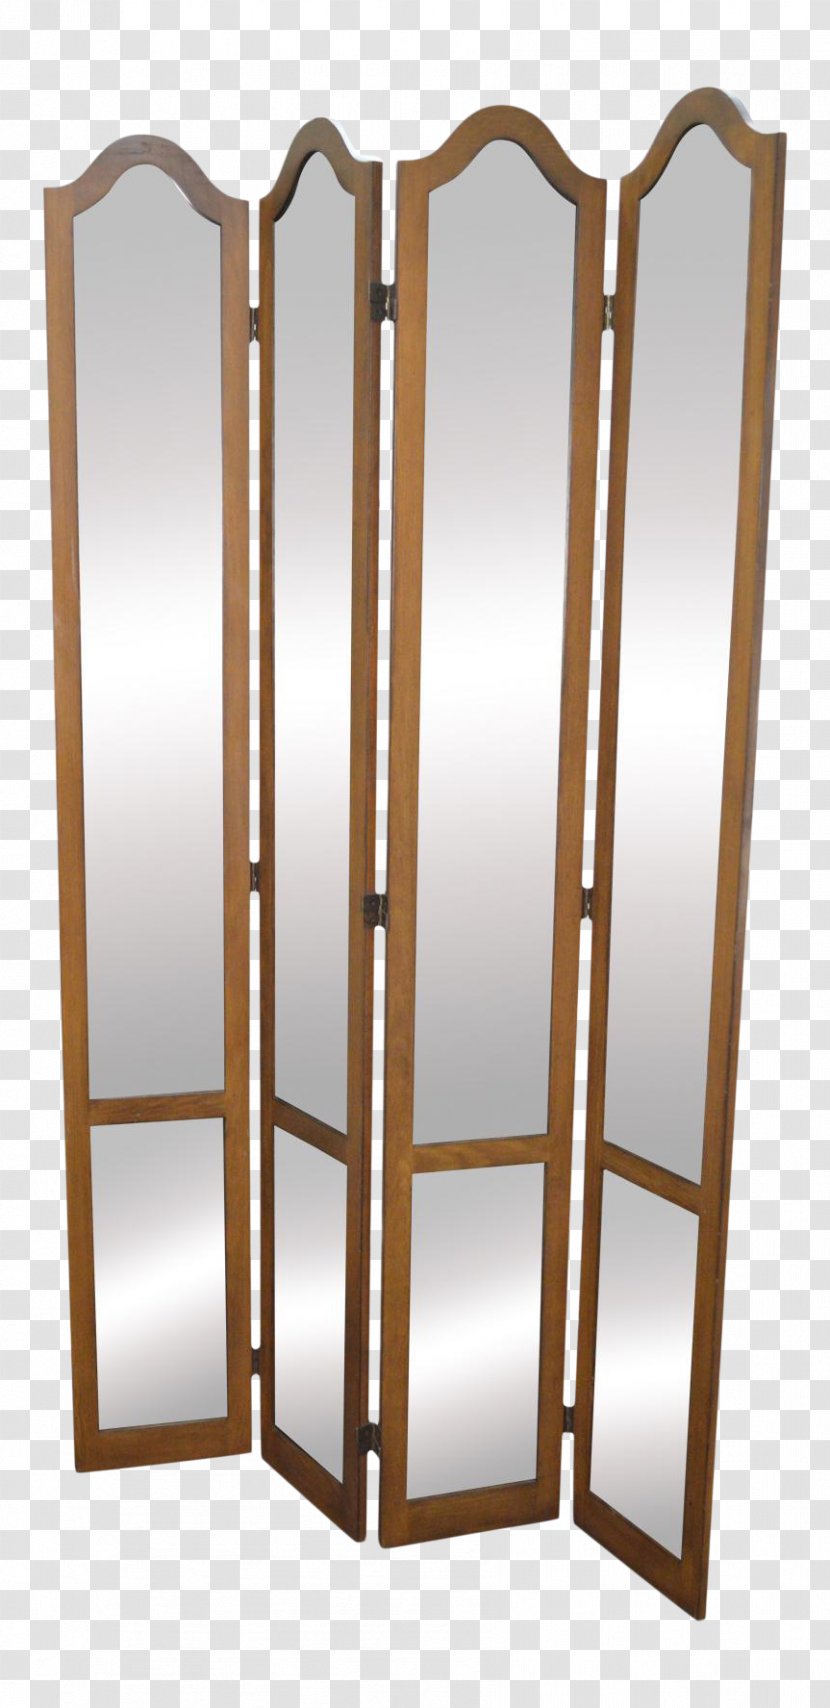 Room Dividers Folding Screen Image Design Mirror - Wood Stain Transparent PNG